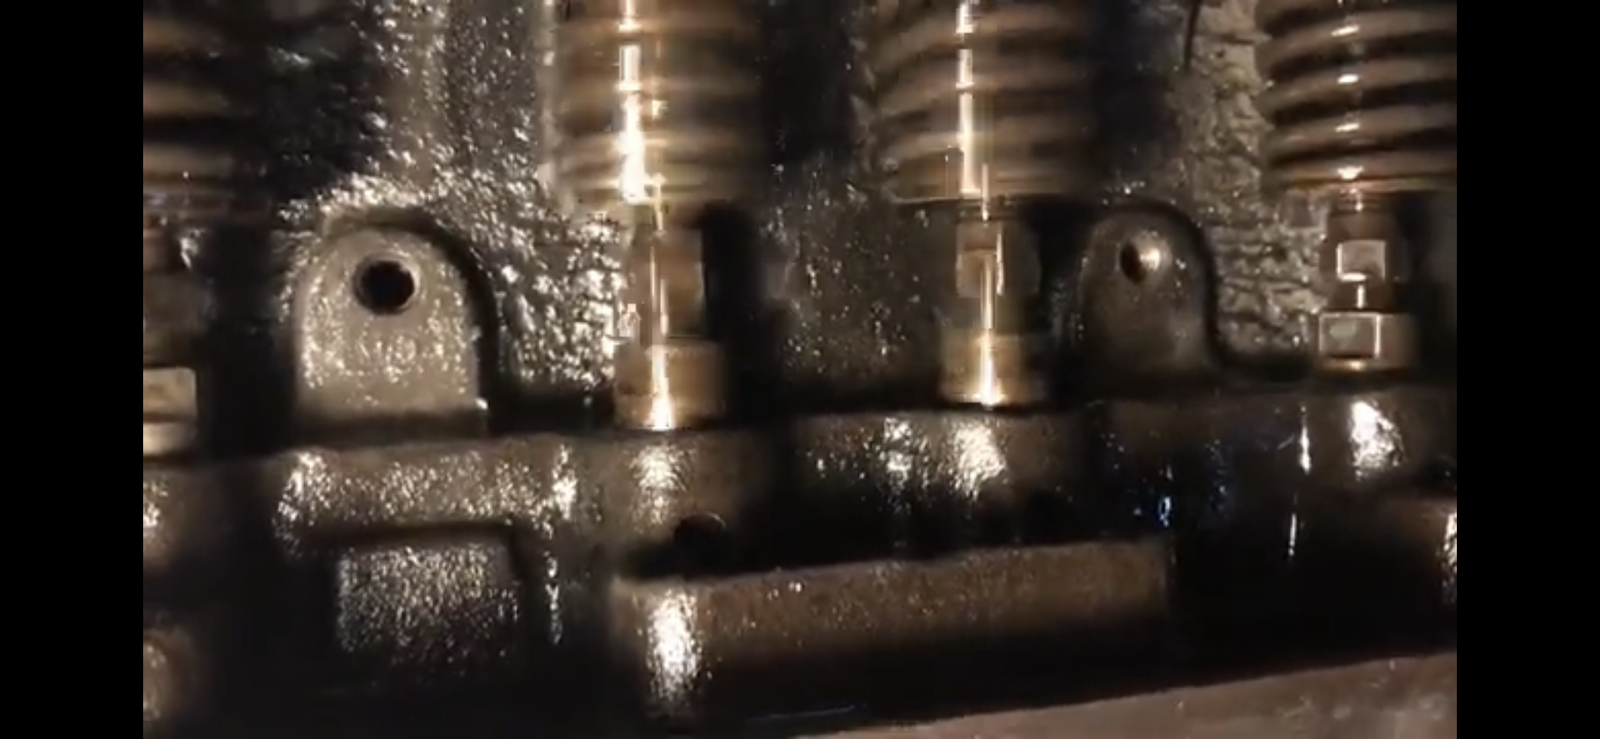 BSA A65 tappets in Nortons